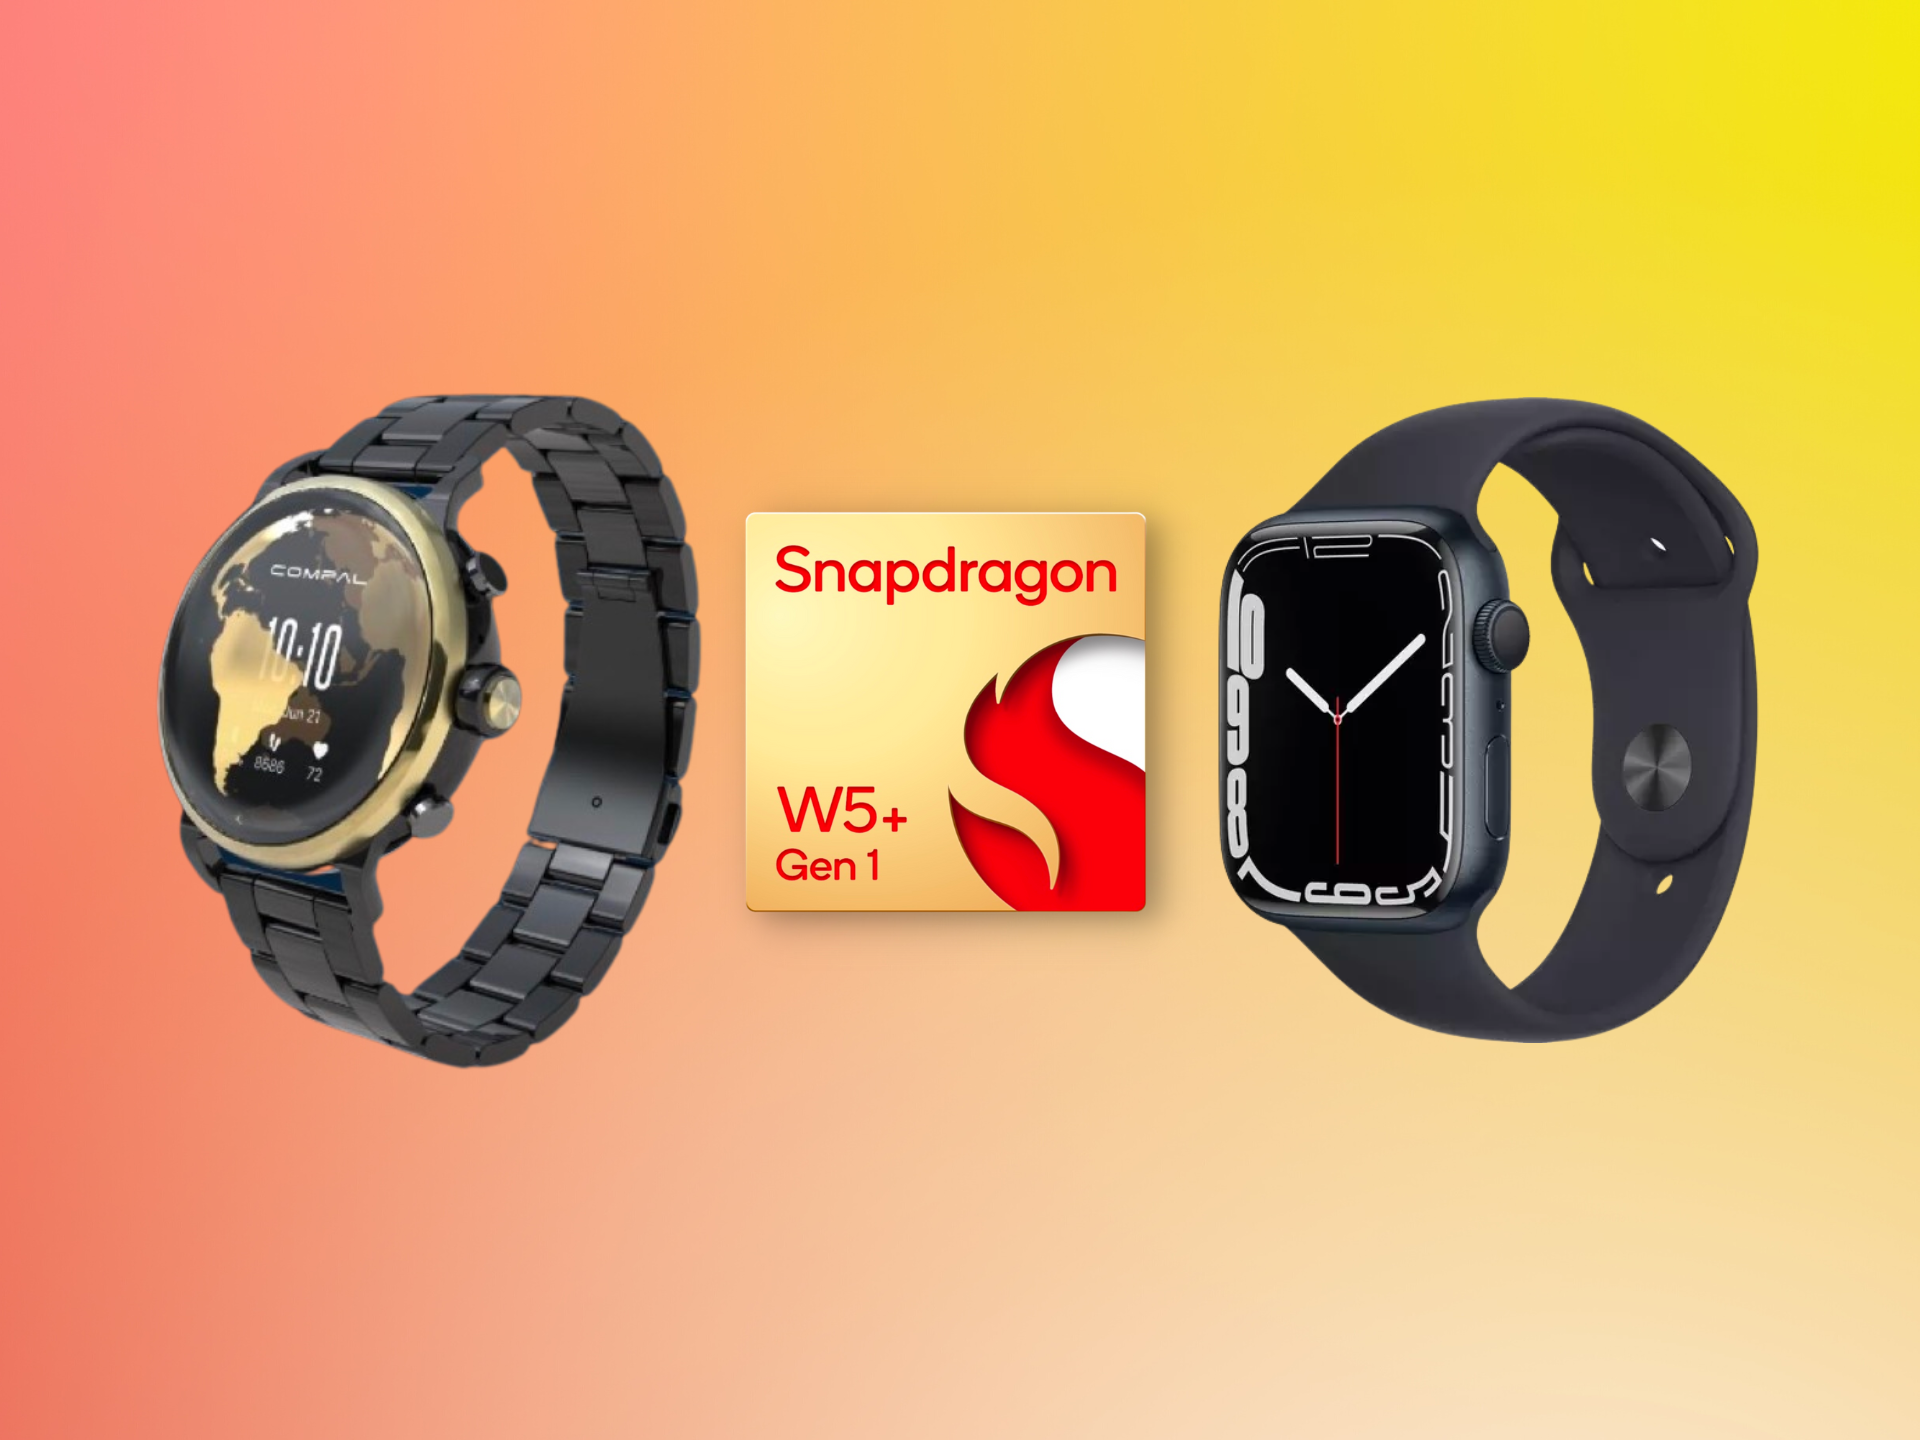 Android smartwatches may finally be able to compete with the Apple Watch